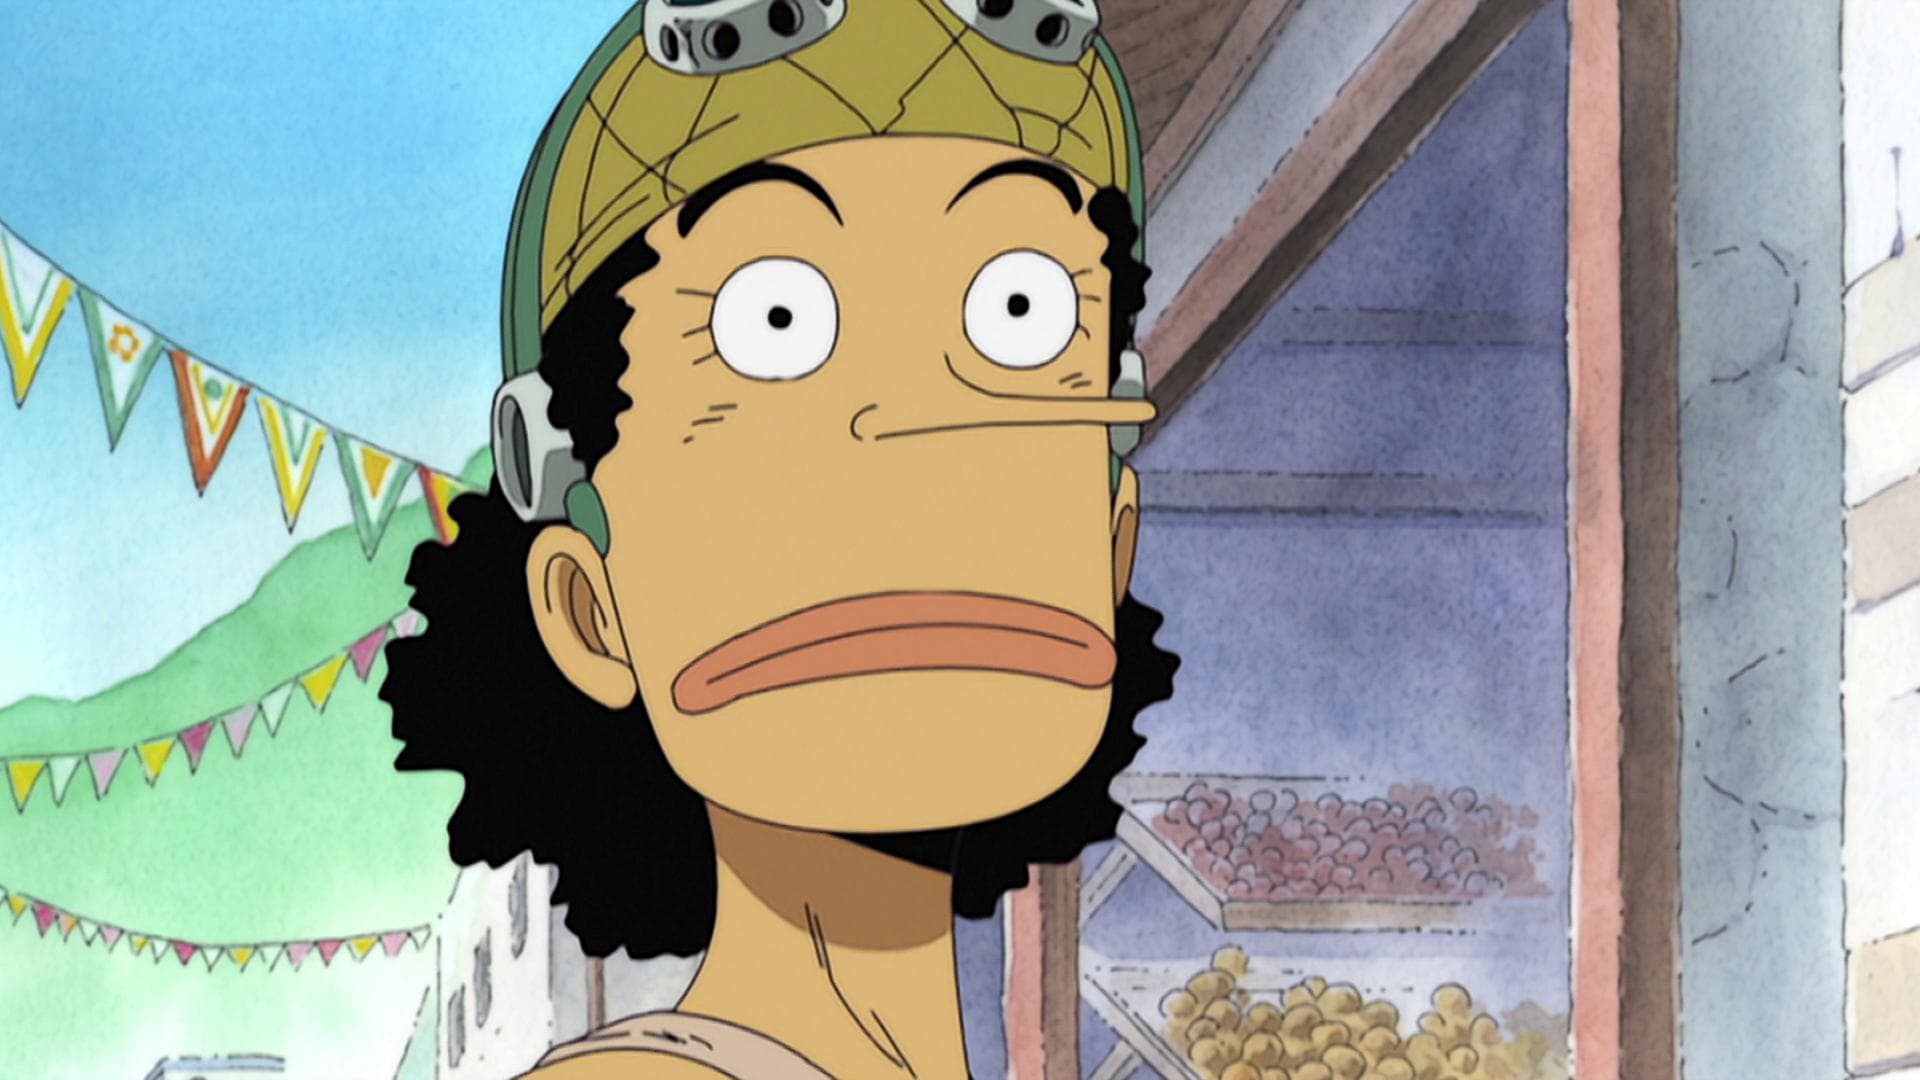 One Piece: 10 controversies that seem worse online than they are